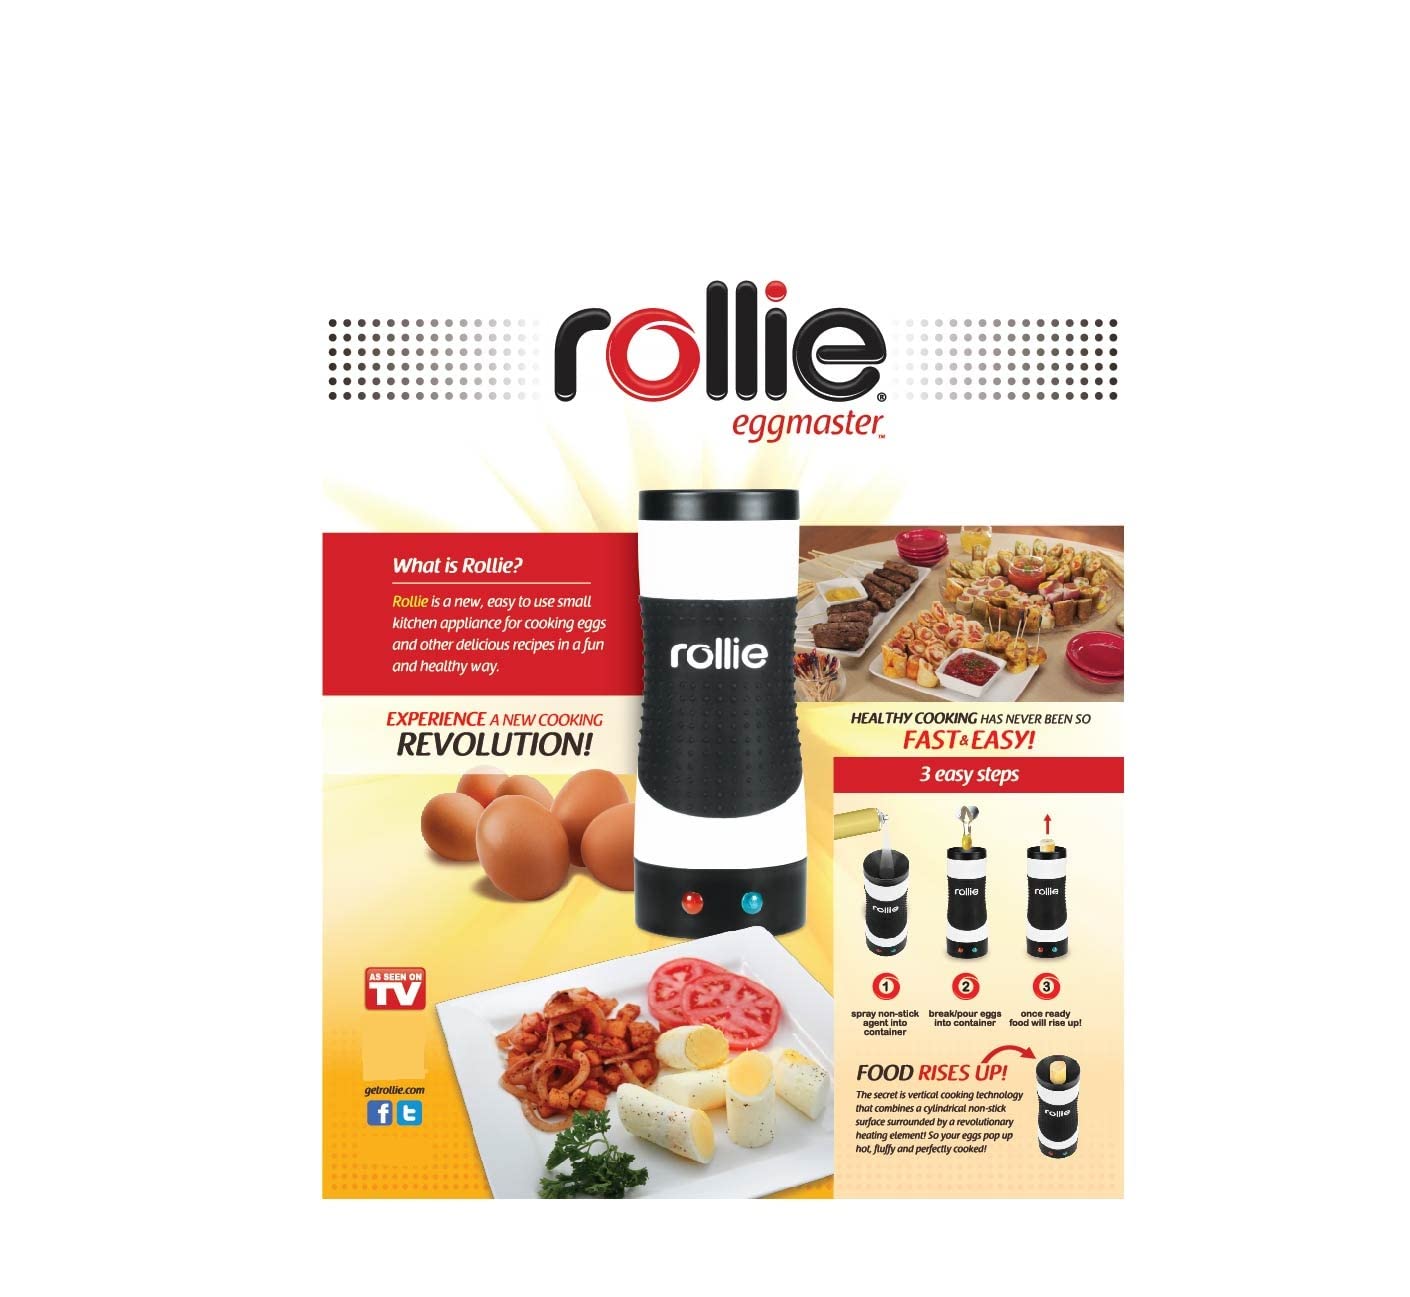 Rollie Egg Cooker: New Machine Makes Omelettes on a Stick